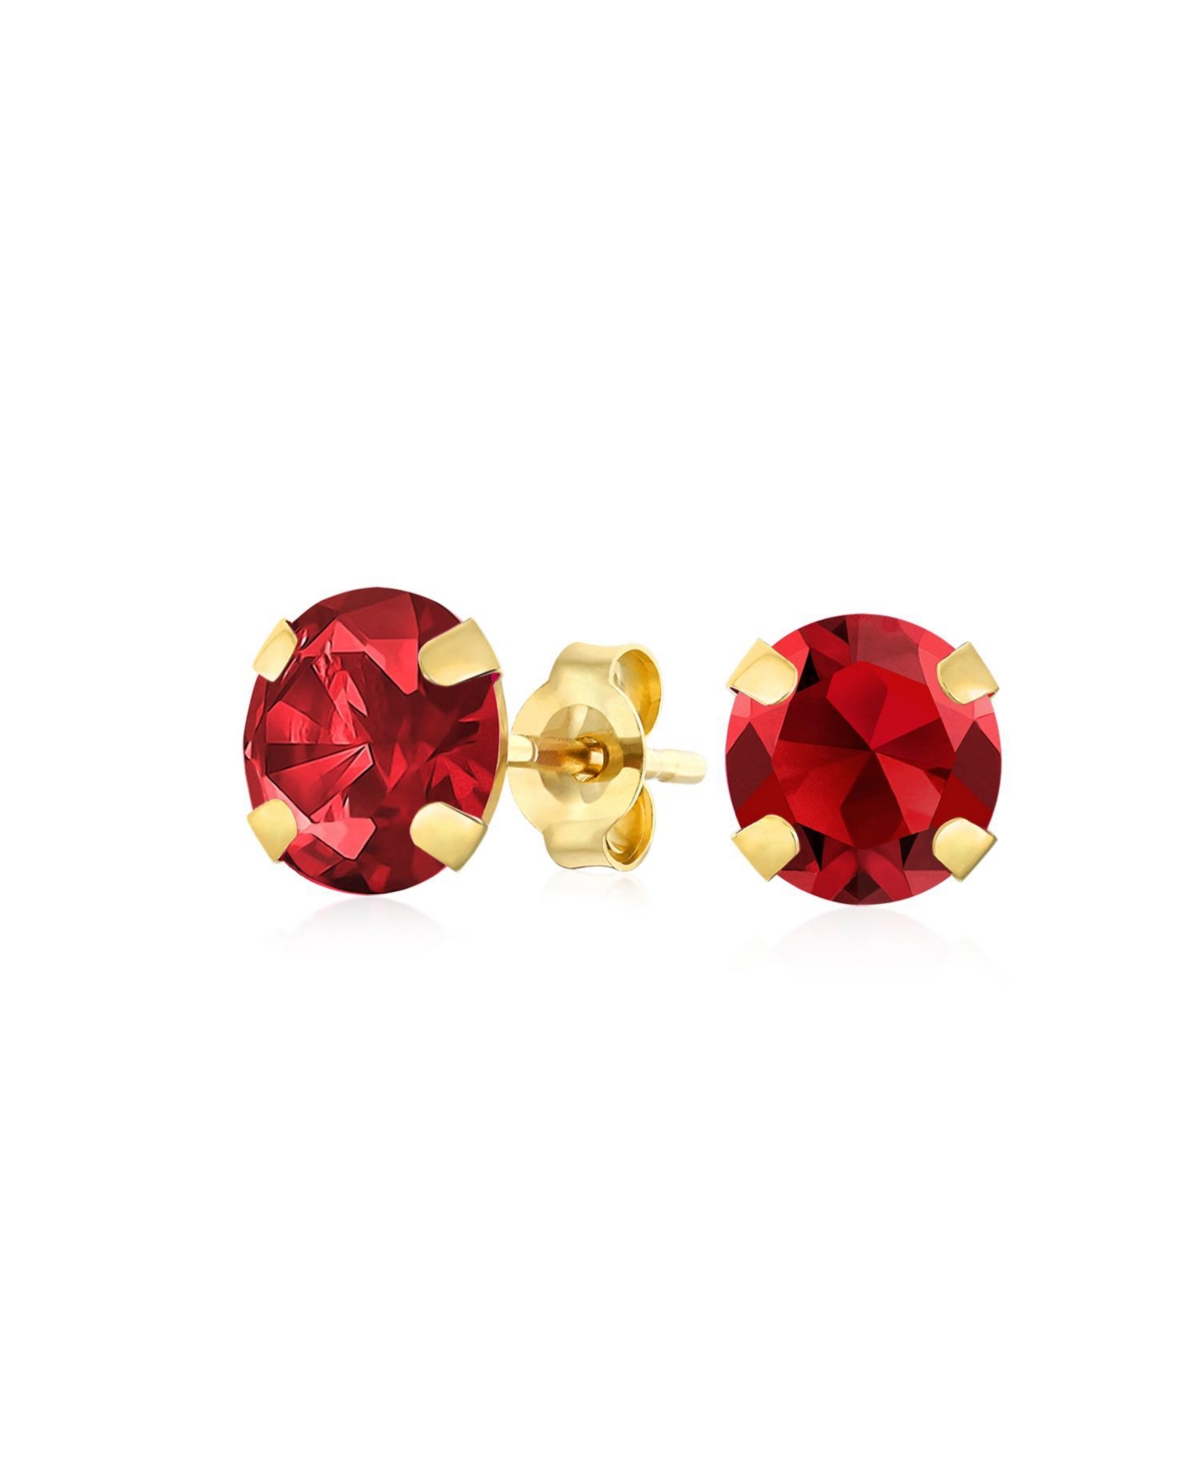 1.4CT Round Gemstone Garnet Stud Earrings For Women Real 14K Yellow Gold January Birthstones 6MM - Red